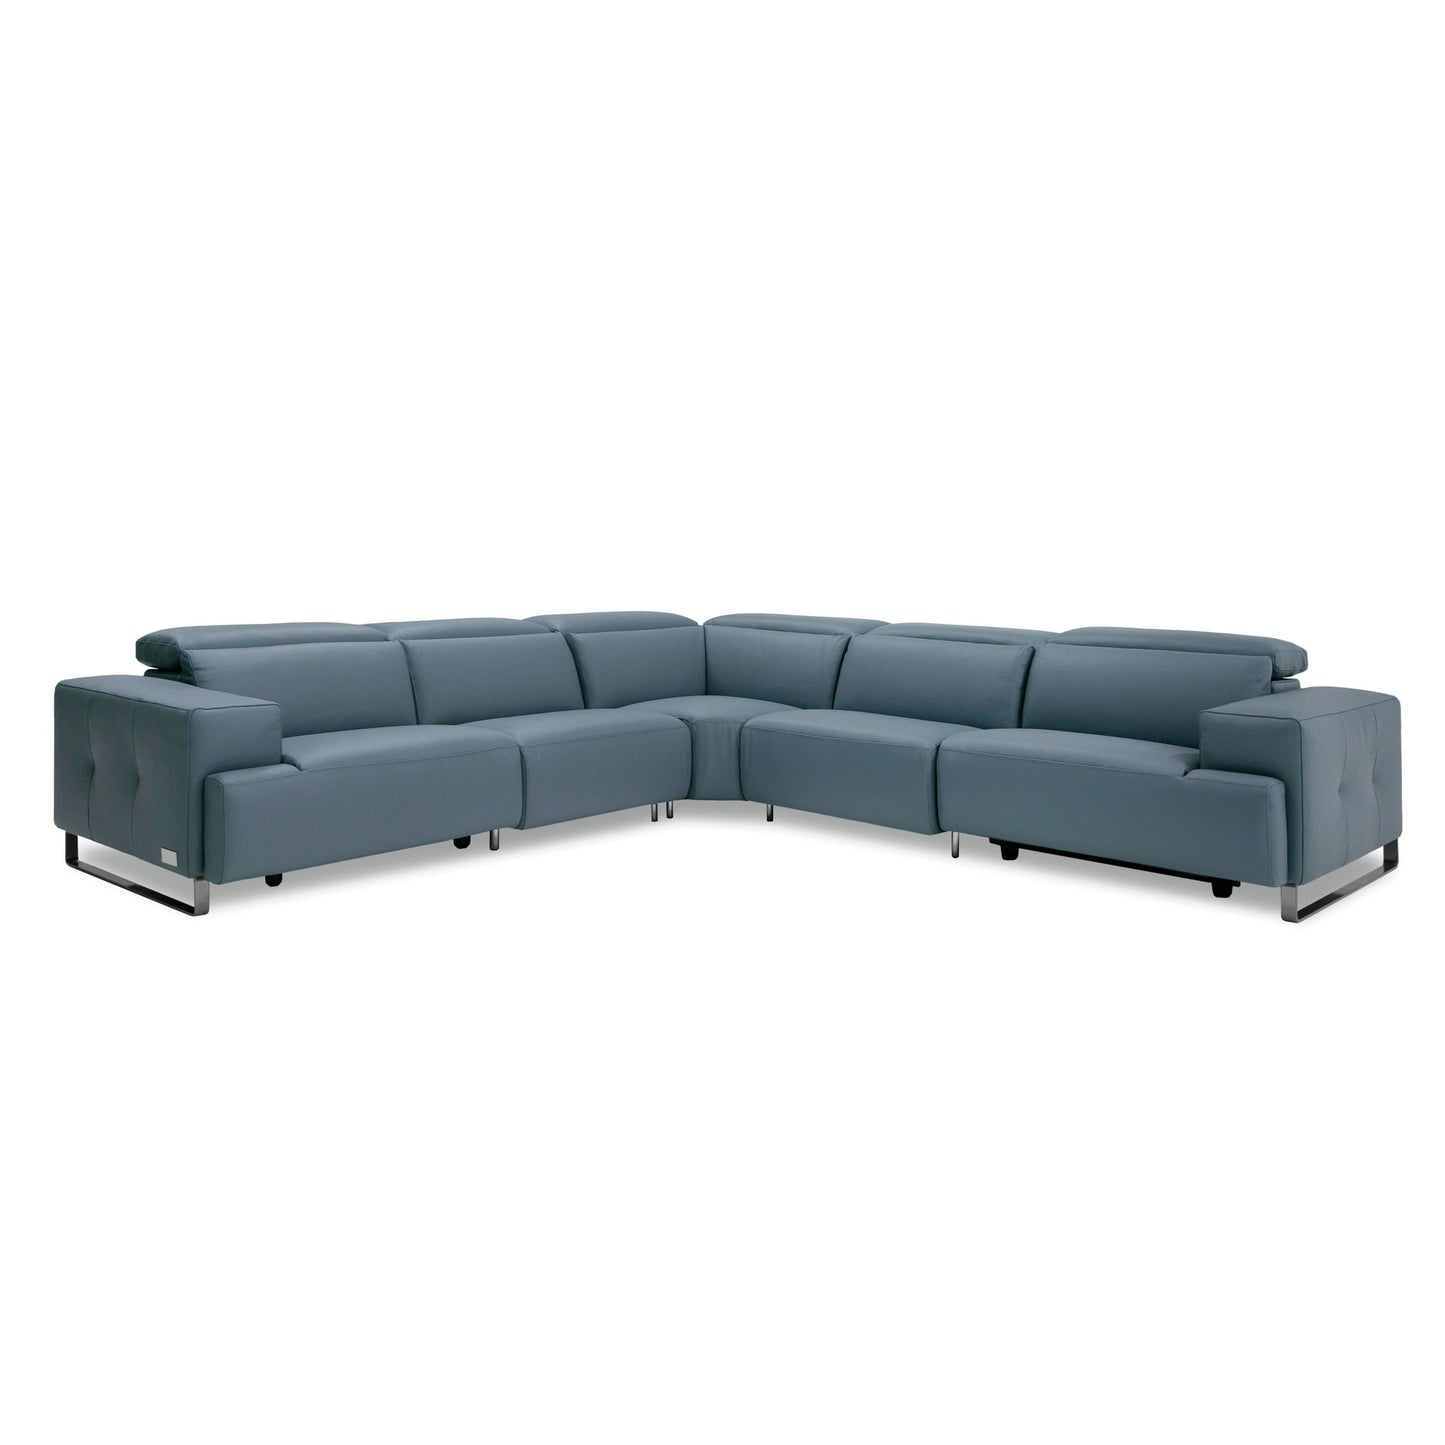 Coronelli Collezioni Sorrento - Italian Steel Blue Leather Sectional Sofa with 2 Recliners